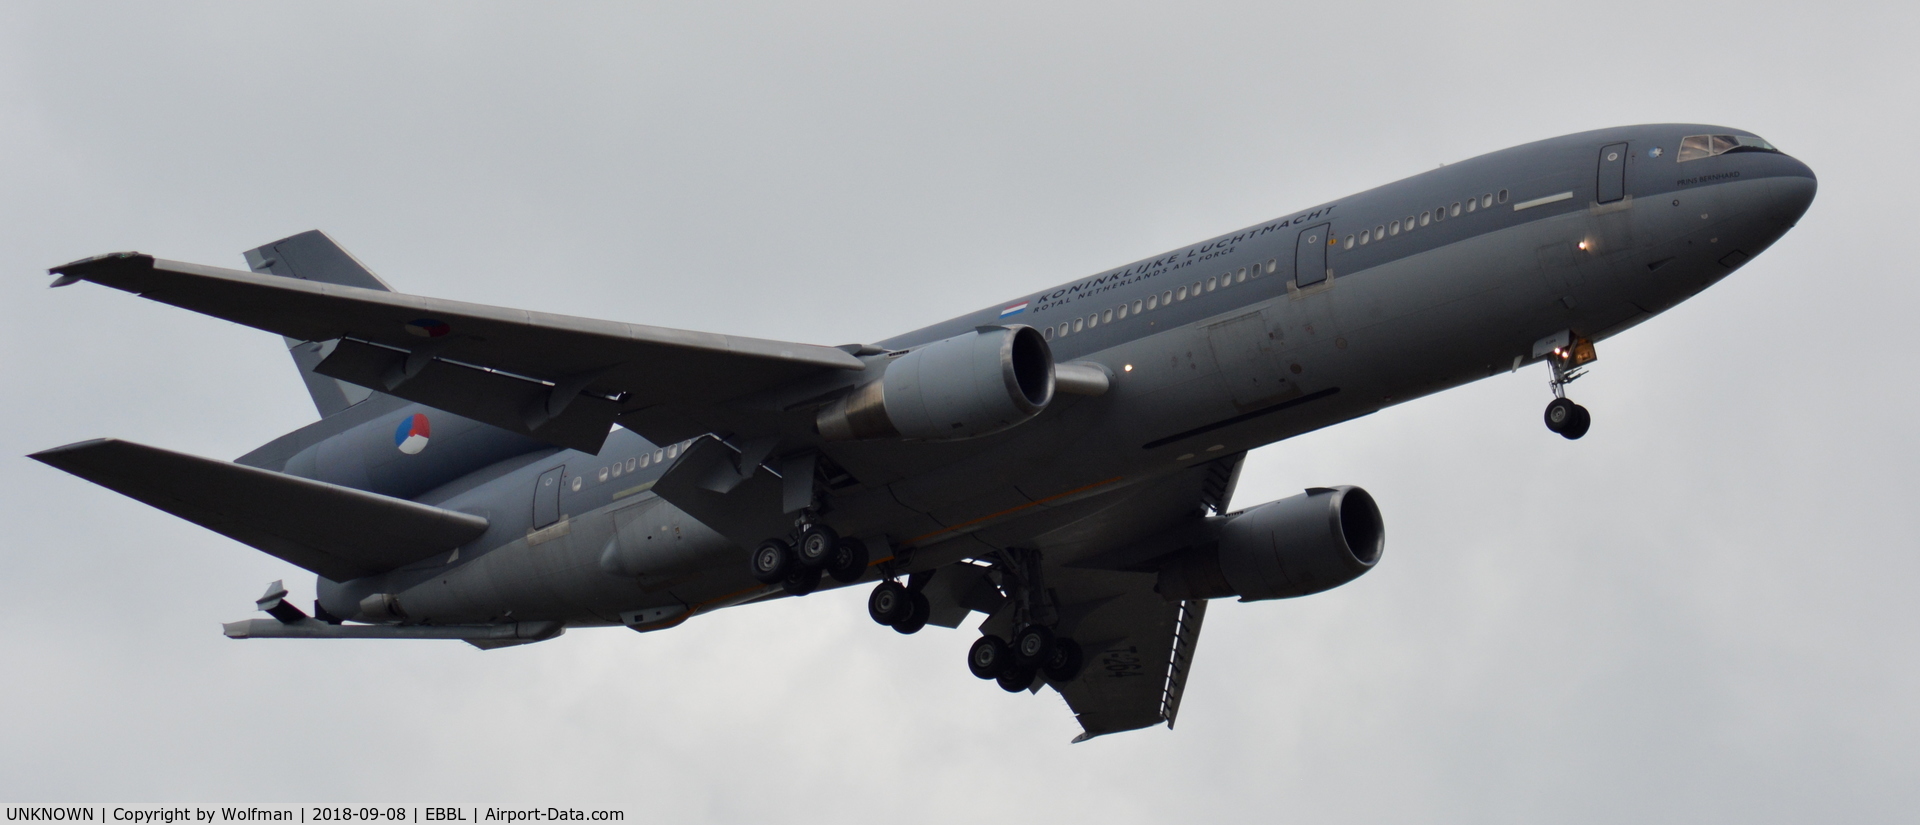 UNKNOWN, Unknown Unknown C/N Unknown, McDonnell Douglas KDC-10 @ the Air Force Days 2018